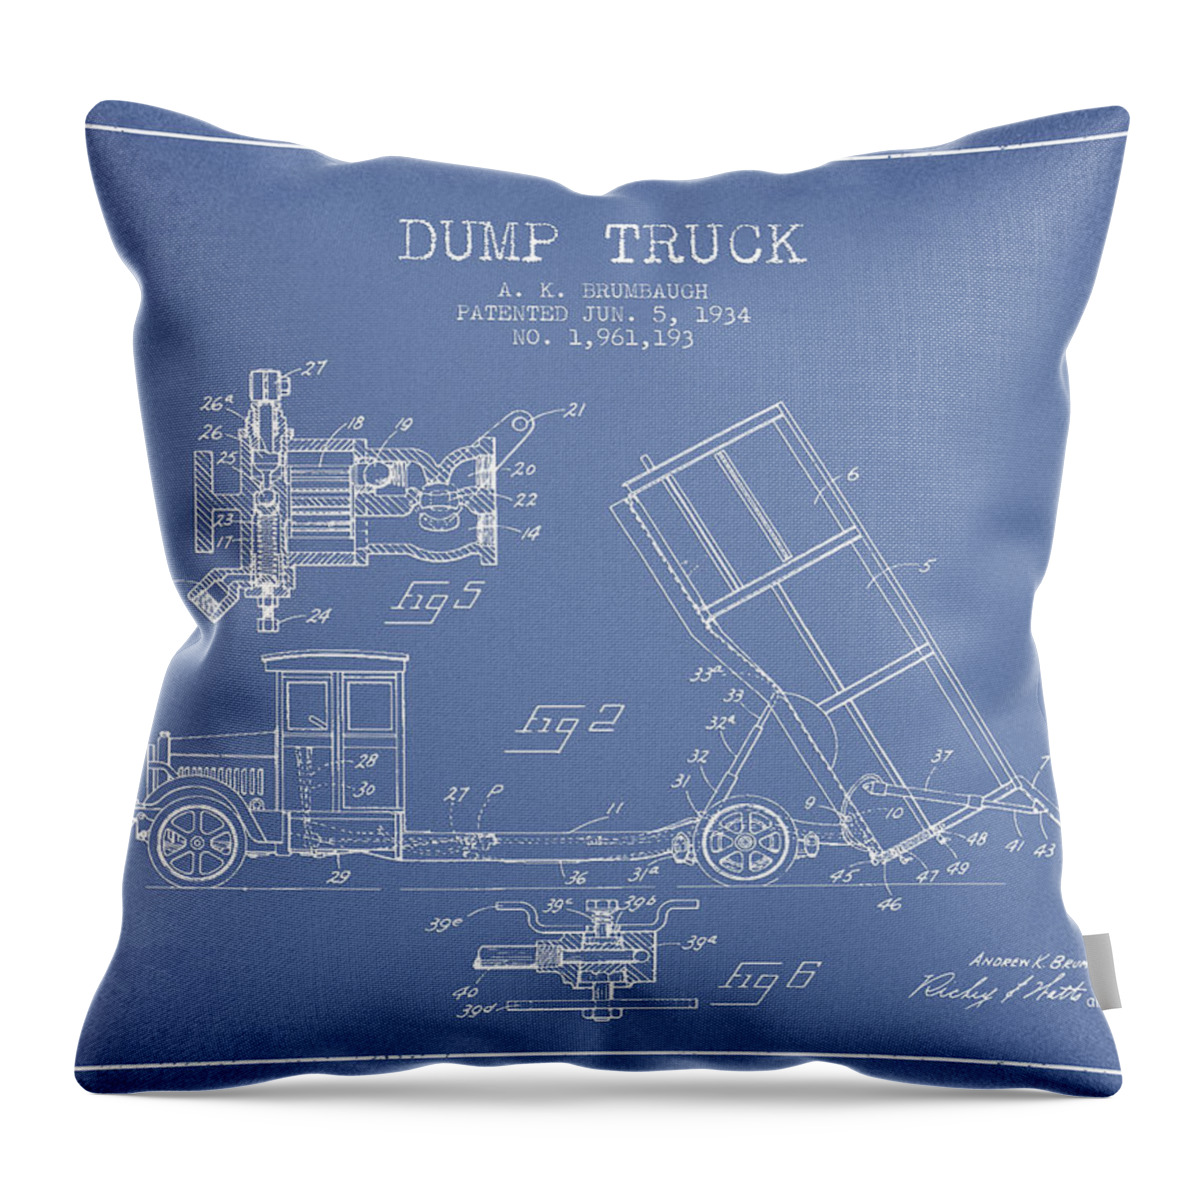 Dump Truck Throw Pillow featuring the digital art Dump Truck patent drawing from 1934 #4 by Aged Pixel